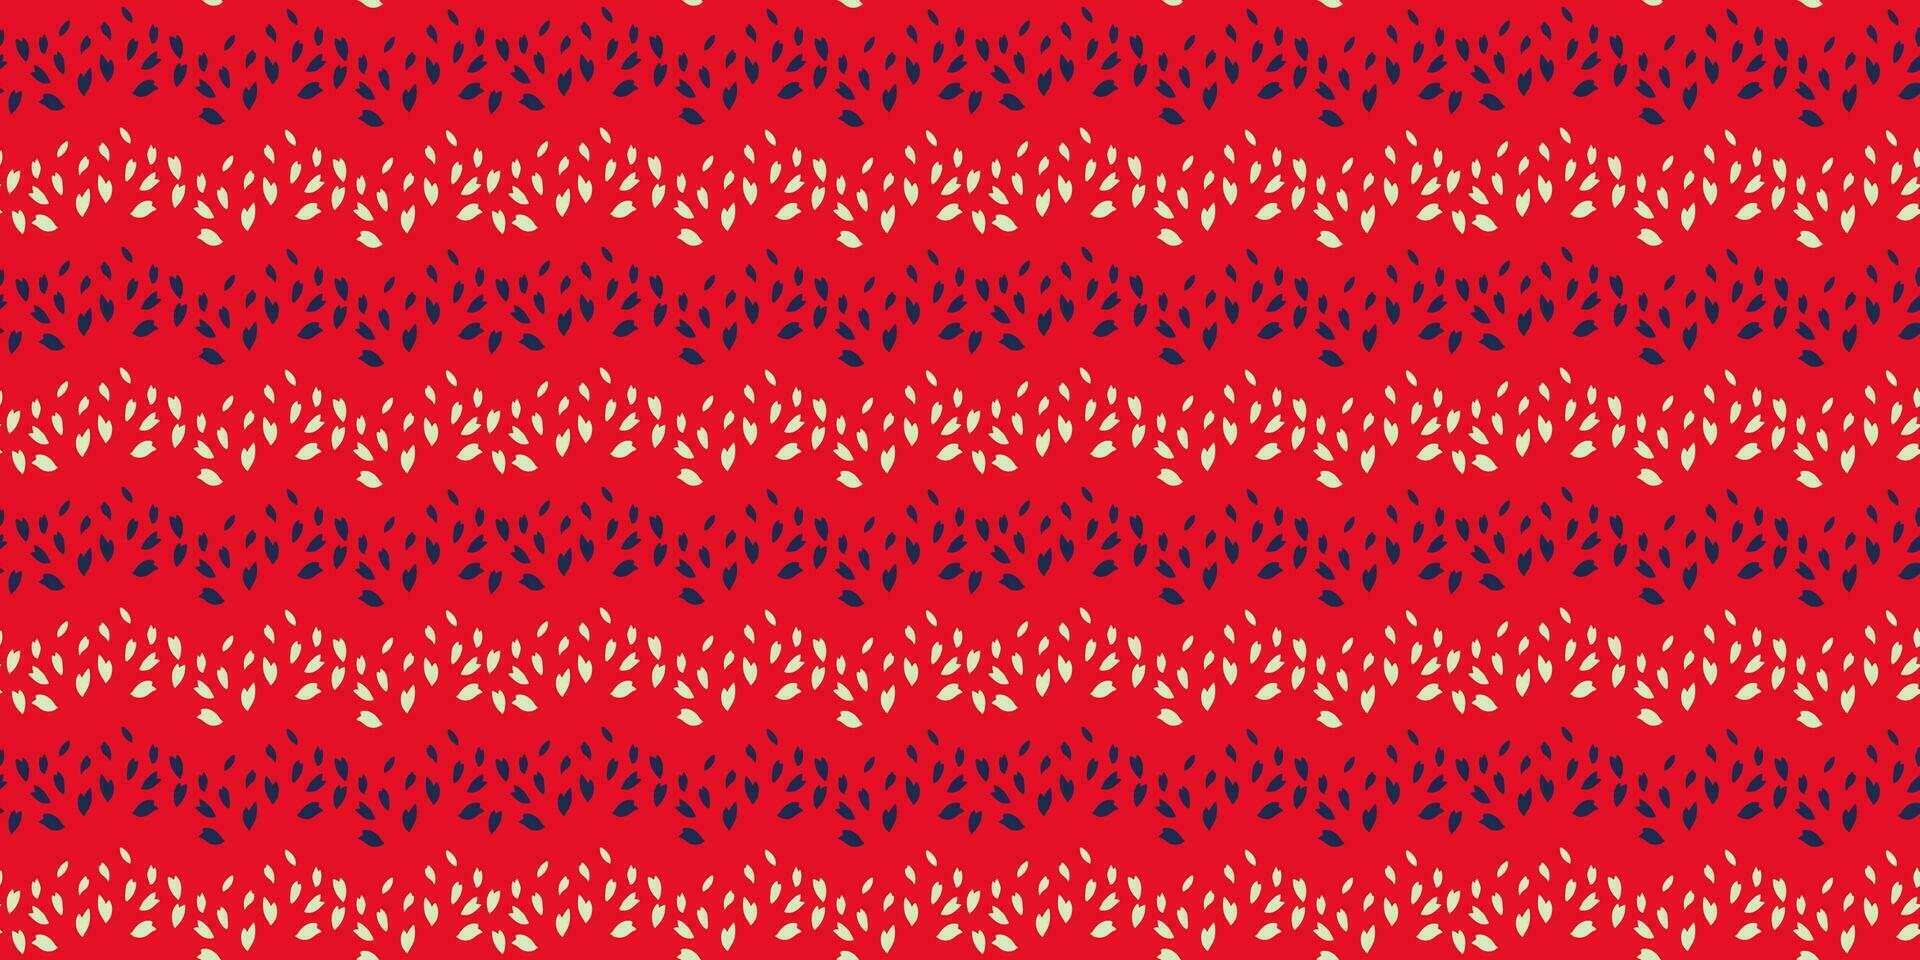 Trendy colorful seamless pattern with striped zigzag in a dot. Simple red background with lines and texture dots, drops, spots. Vector hand drawn sketch shape. Design for fashion, textile, fabric